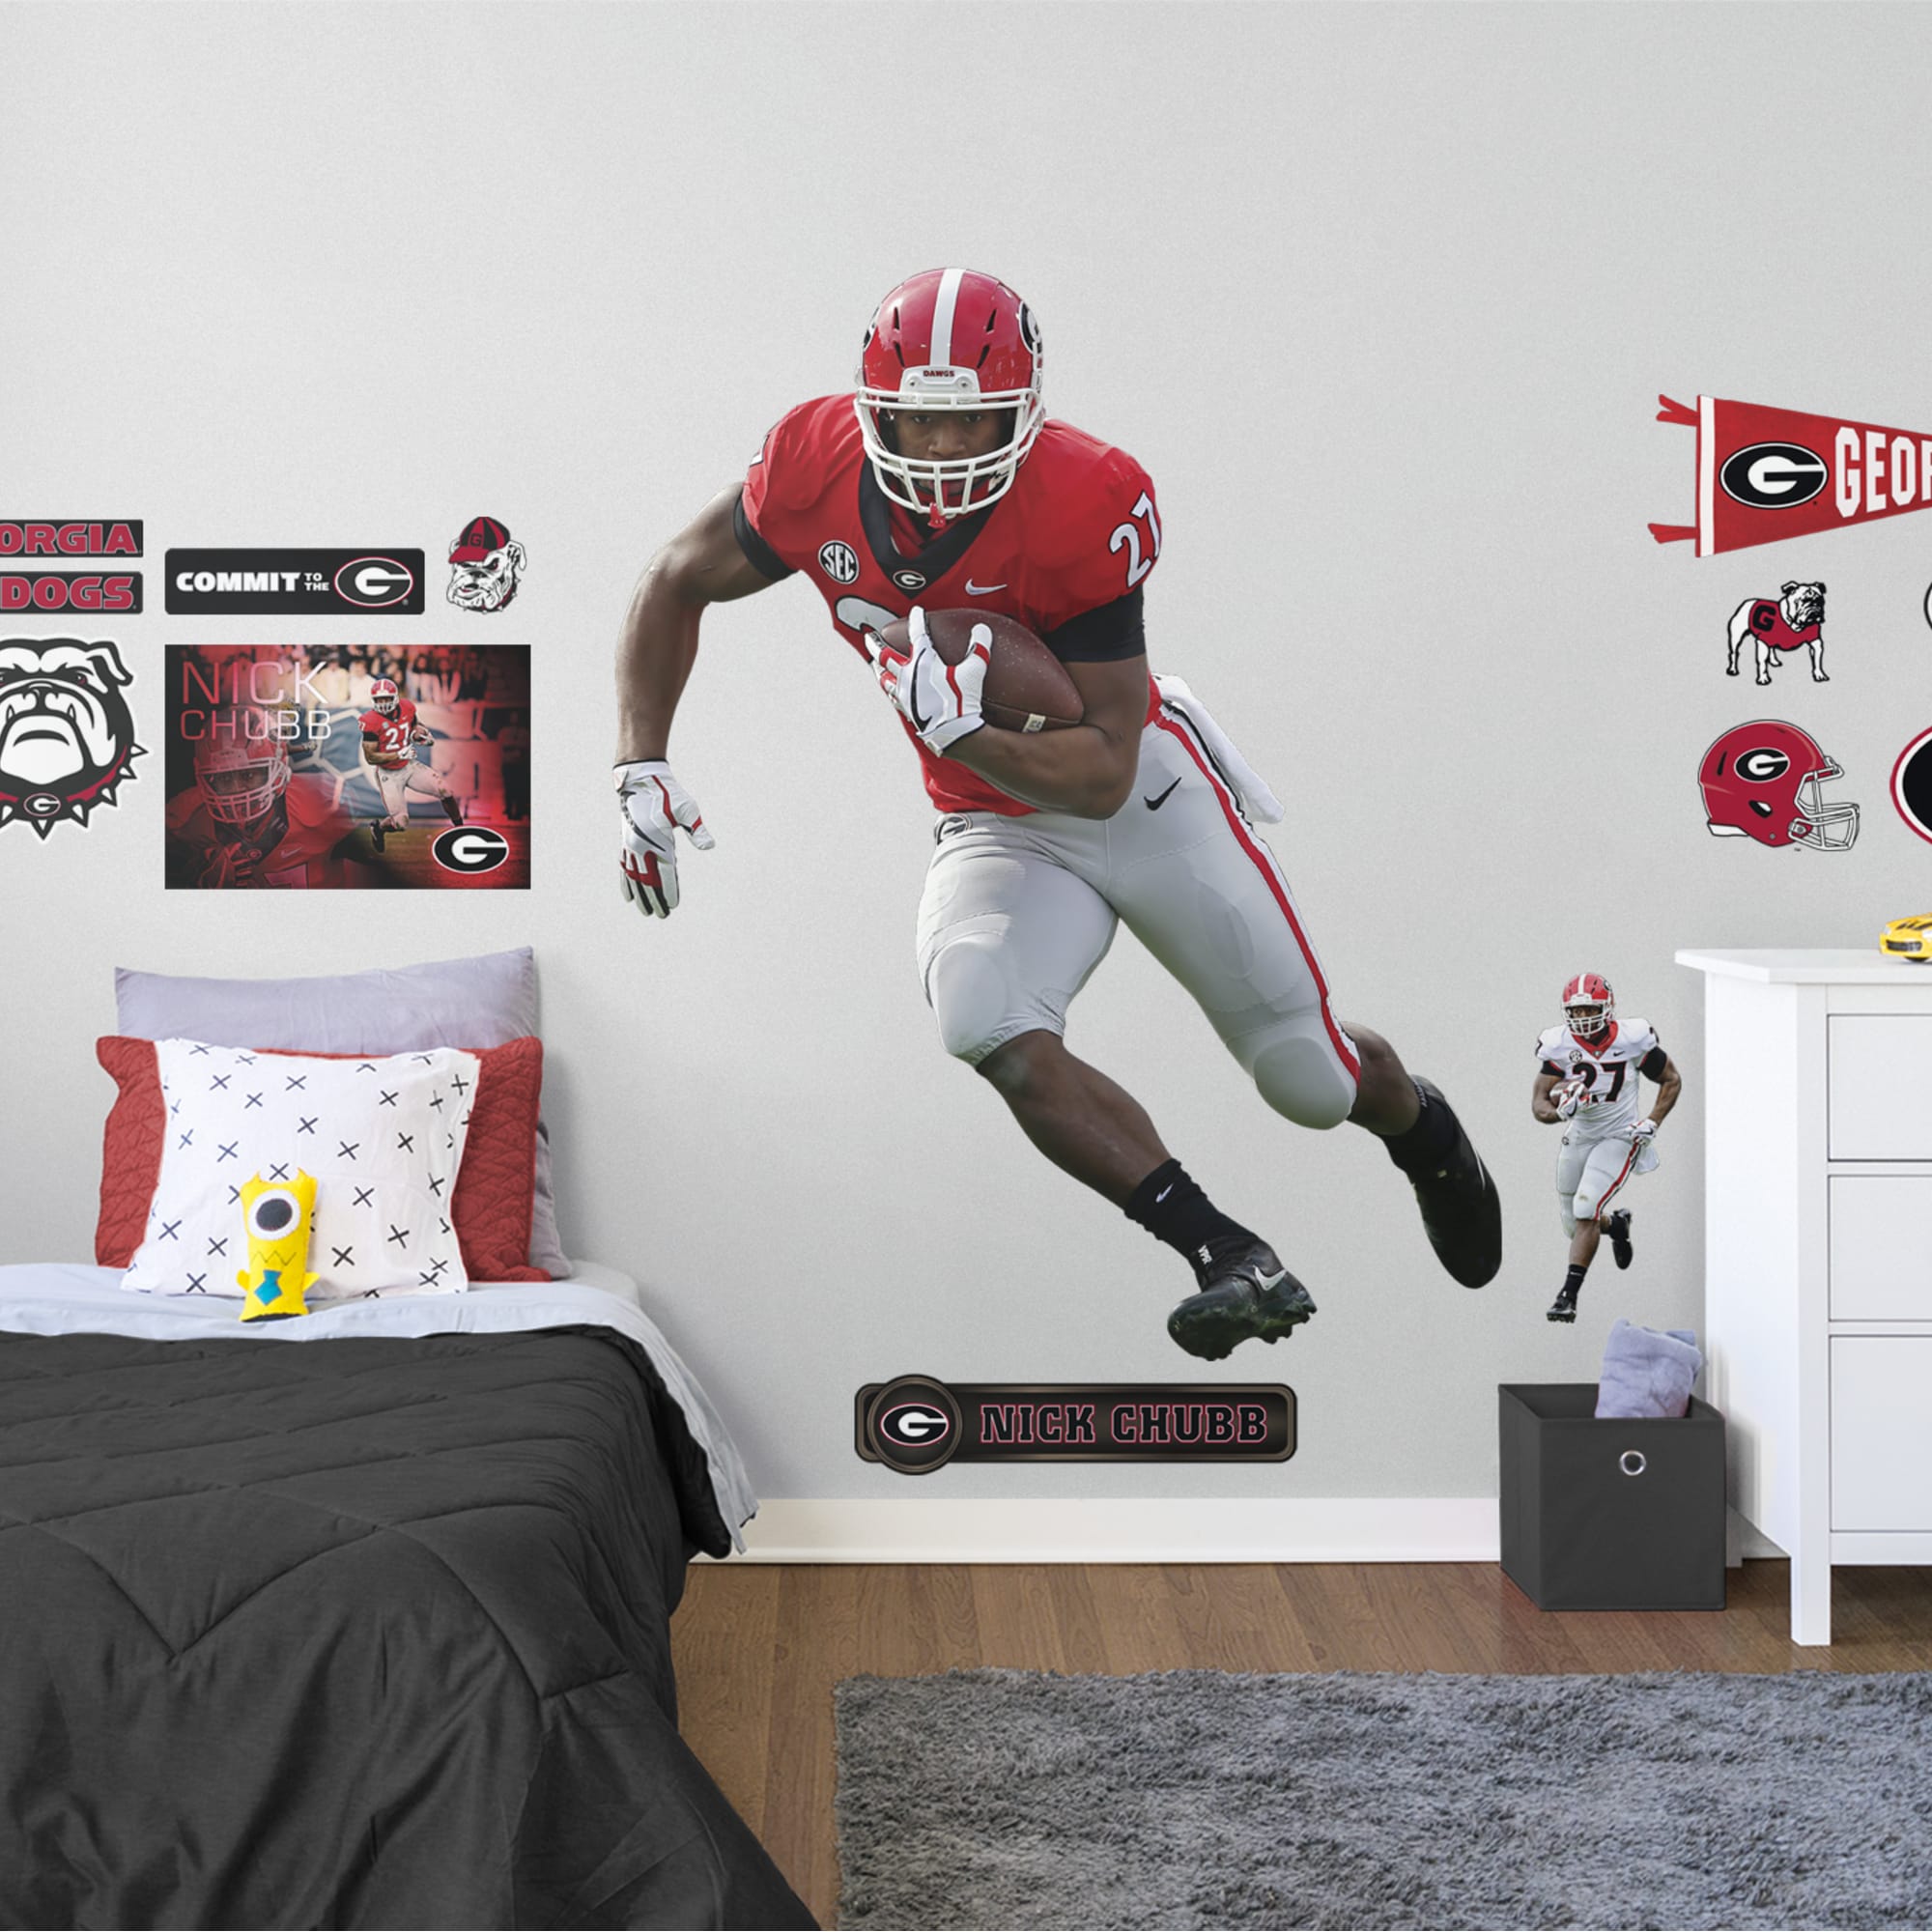 Nick Chubb for Georgia Bulldogs: Georgia - Officially Licensed Removable Wall Decal Life-Size Athlete + 15 Decals (56"W x 69"H)